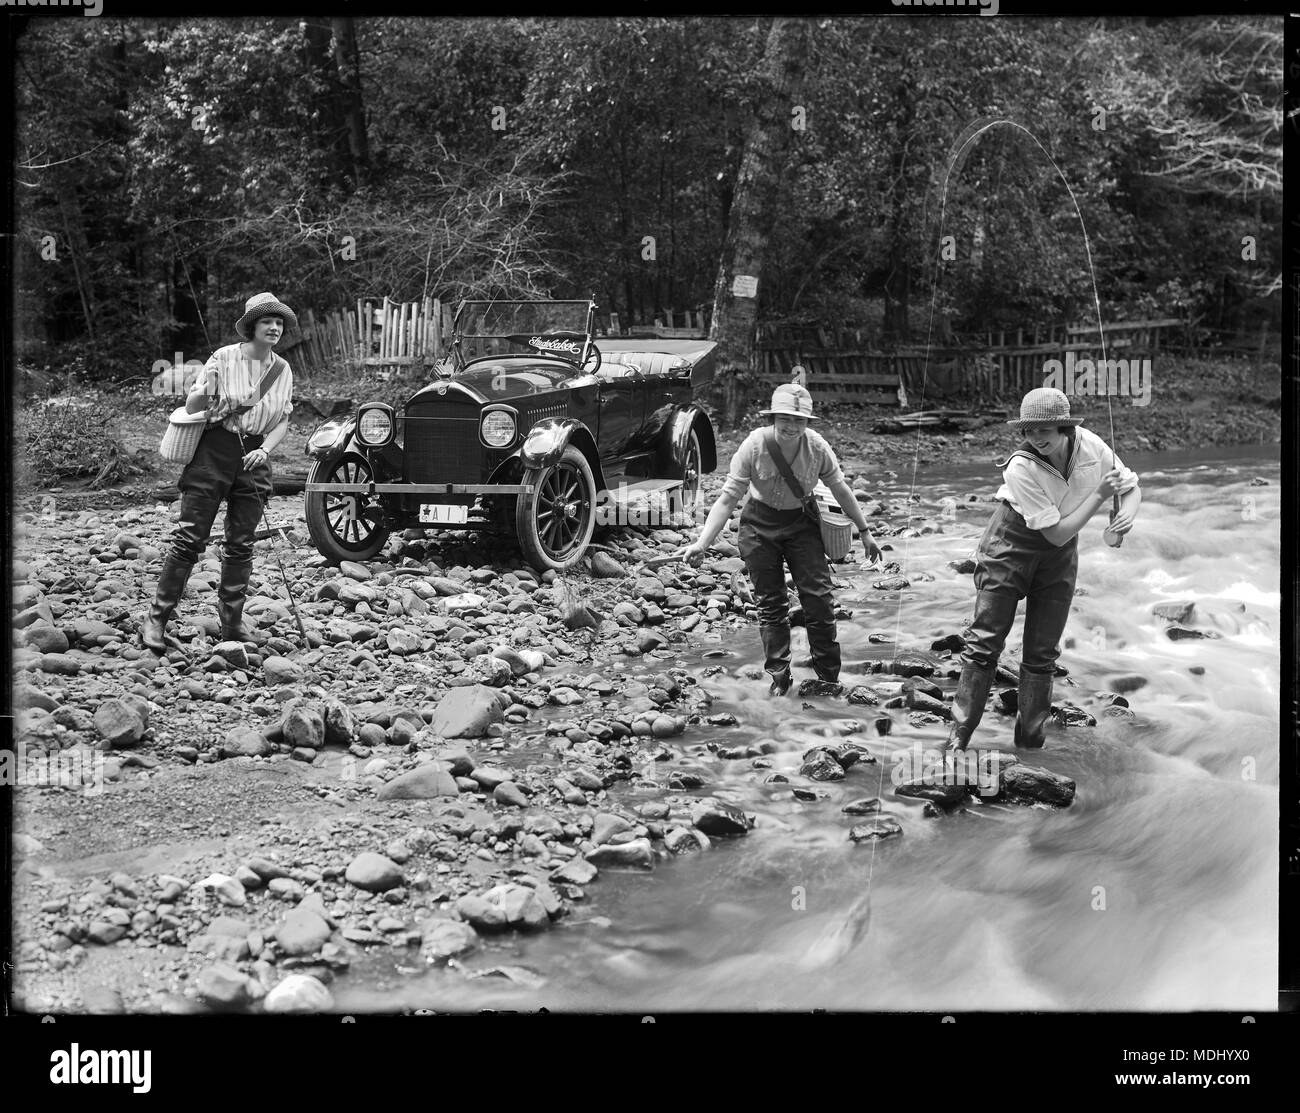 View of three pretty girls fishing in mountain stream with their 1919 'Studebaker' convertible automobile in the background. Studebaker sign displayed in windshield. Location in the mountains of California. Stock Photo